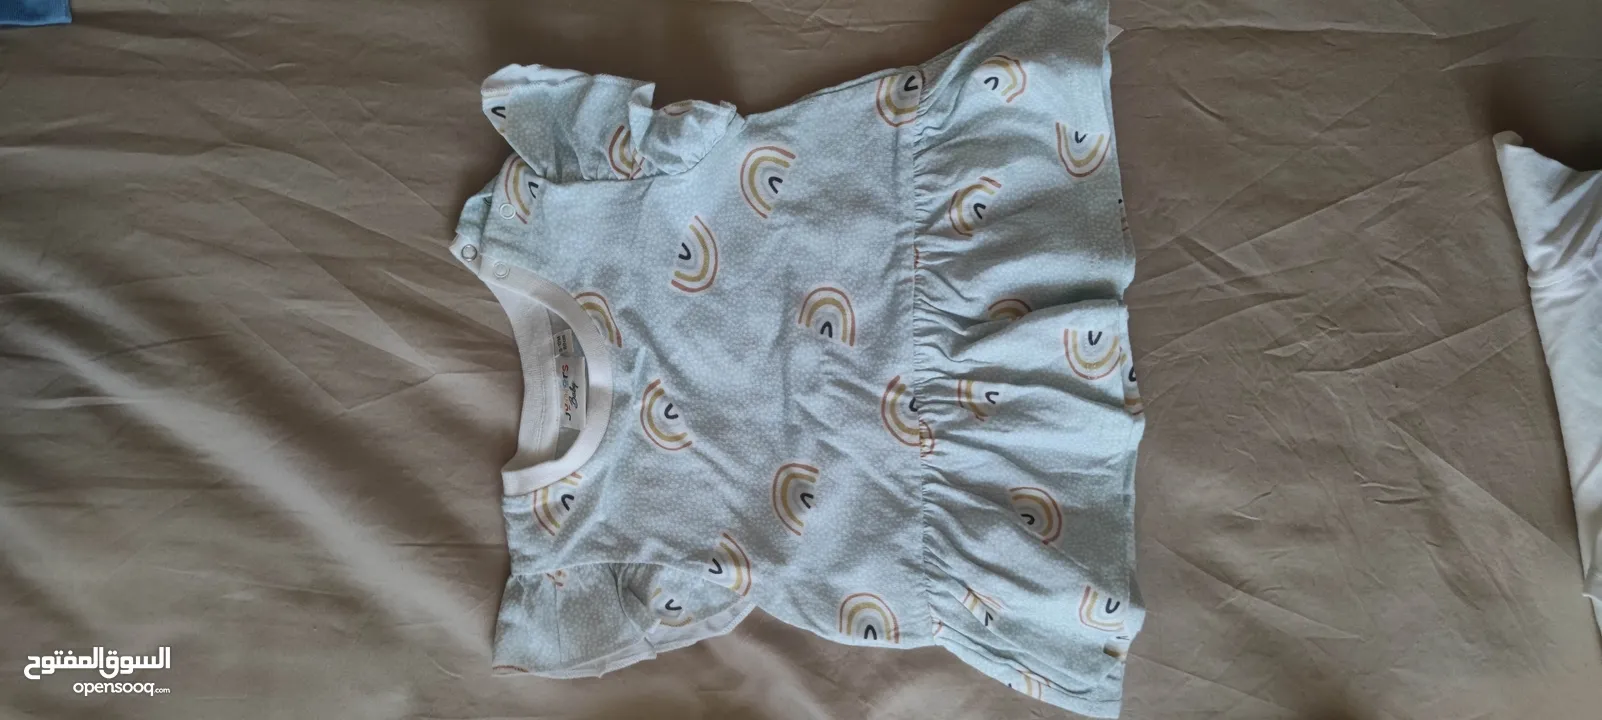 New&used baby items give & sell